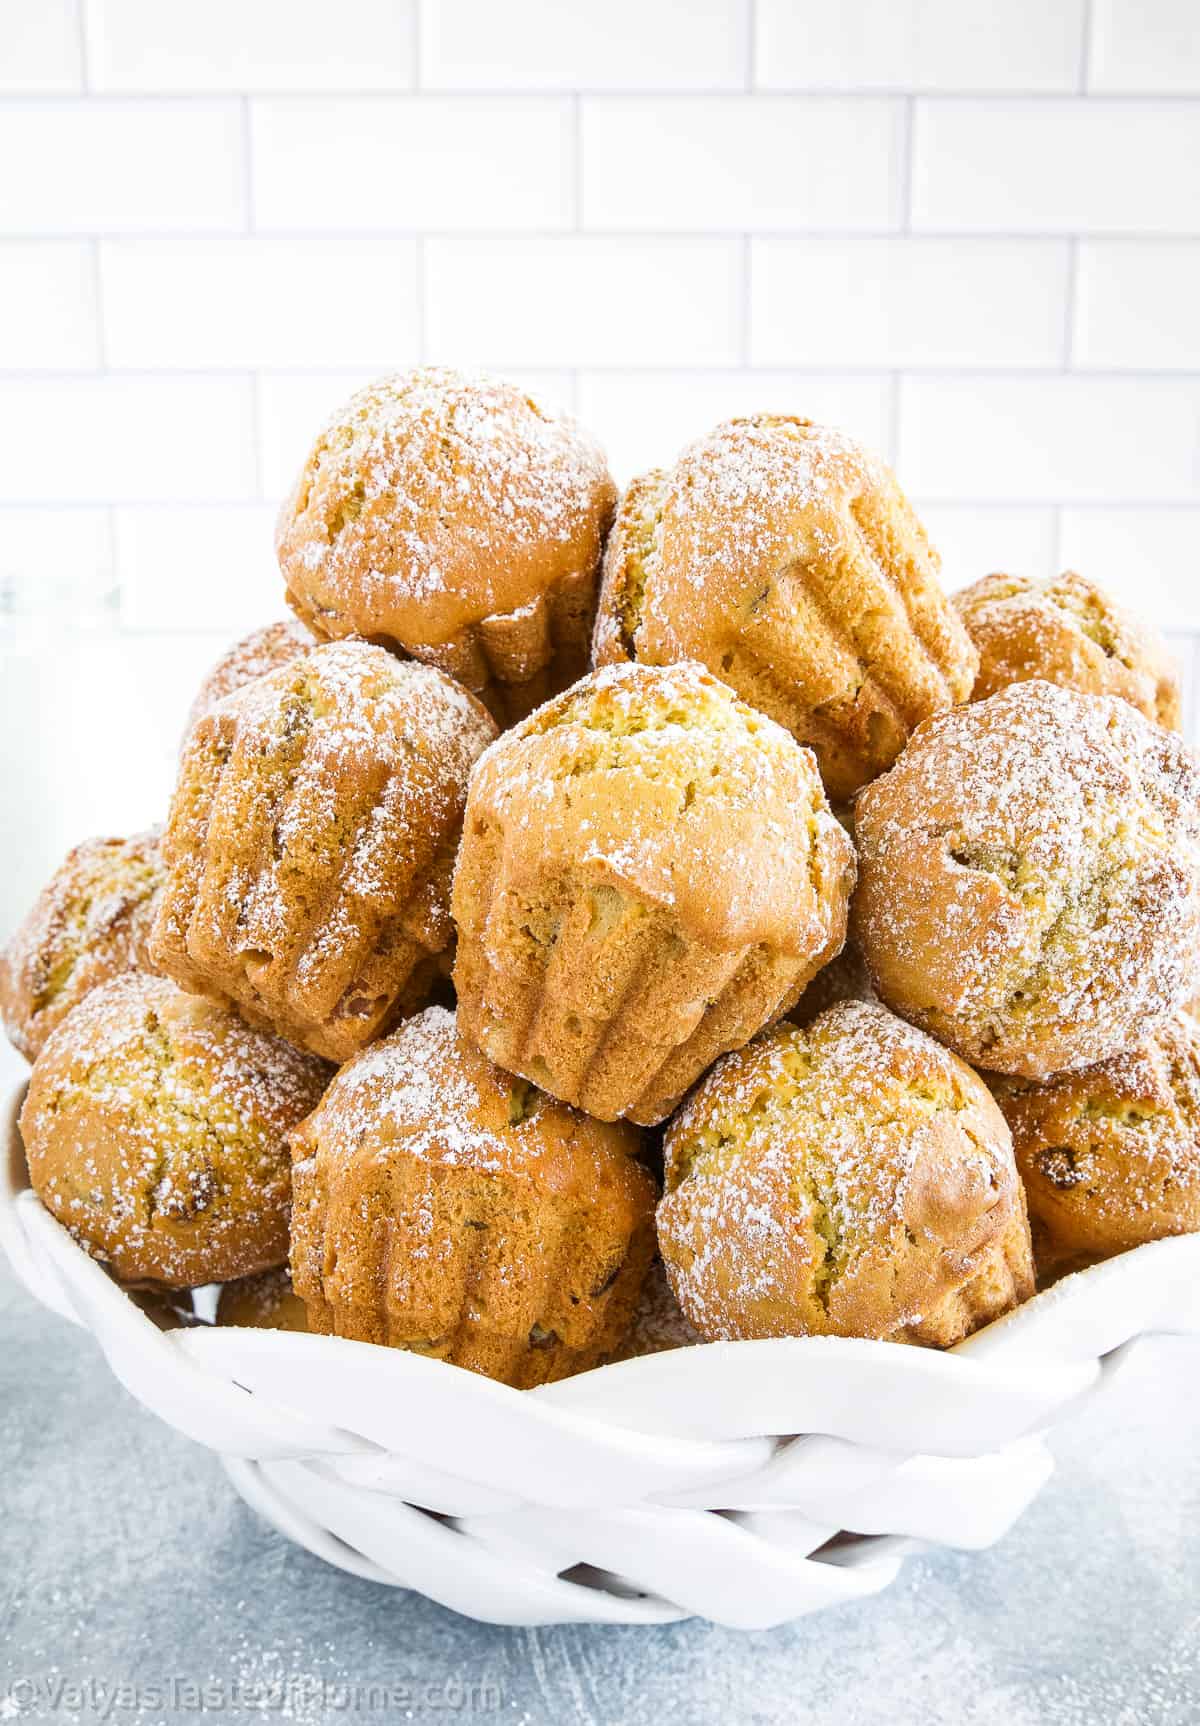 The finishing touch of powdered sugar on top adds a delightful sweetness that makes these muffins a must-have.